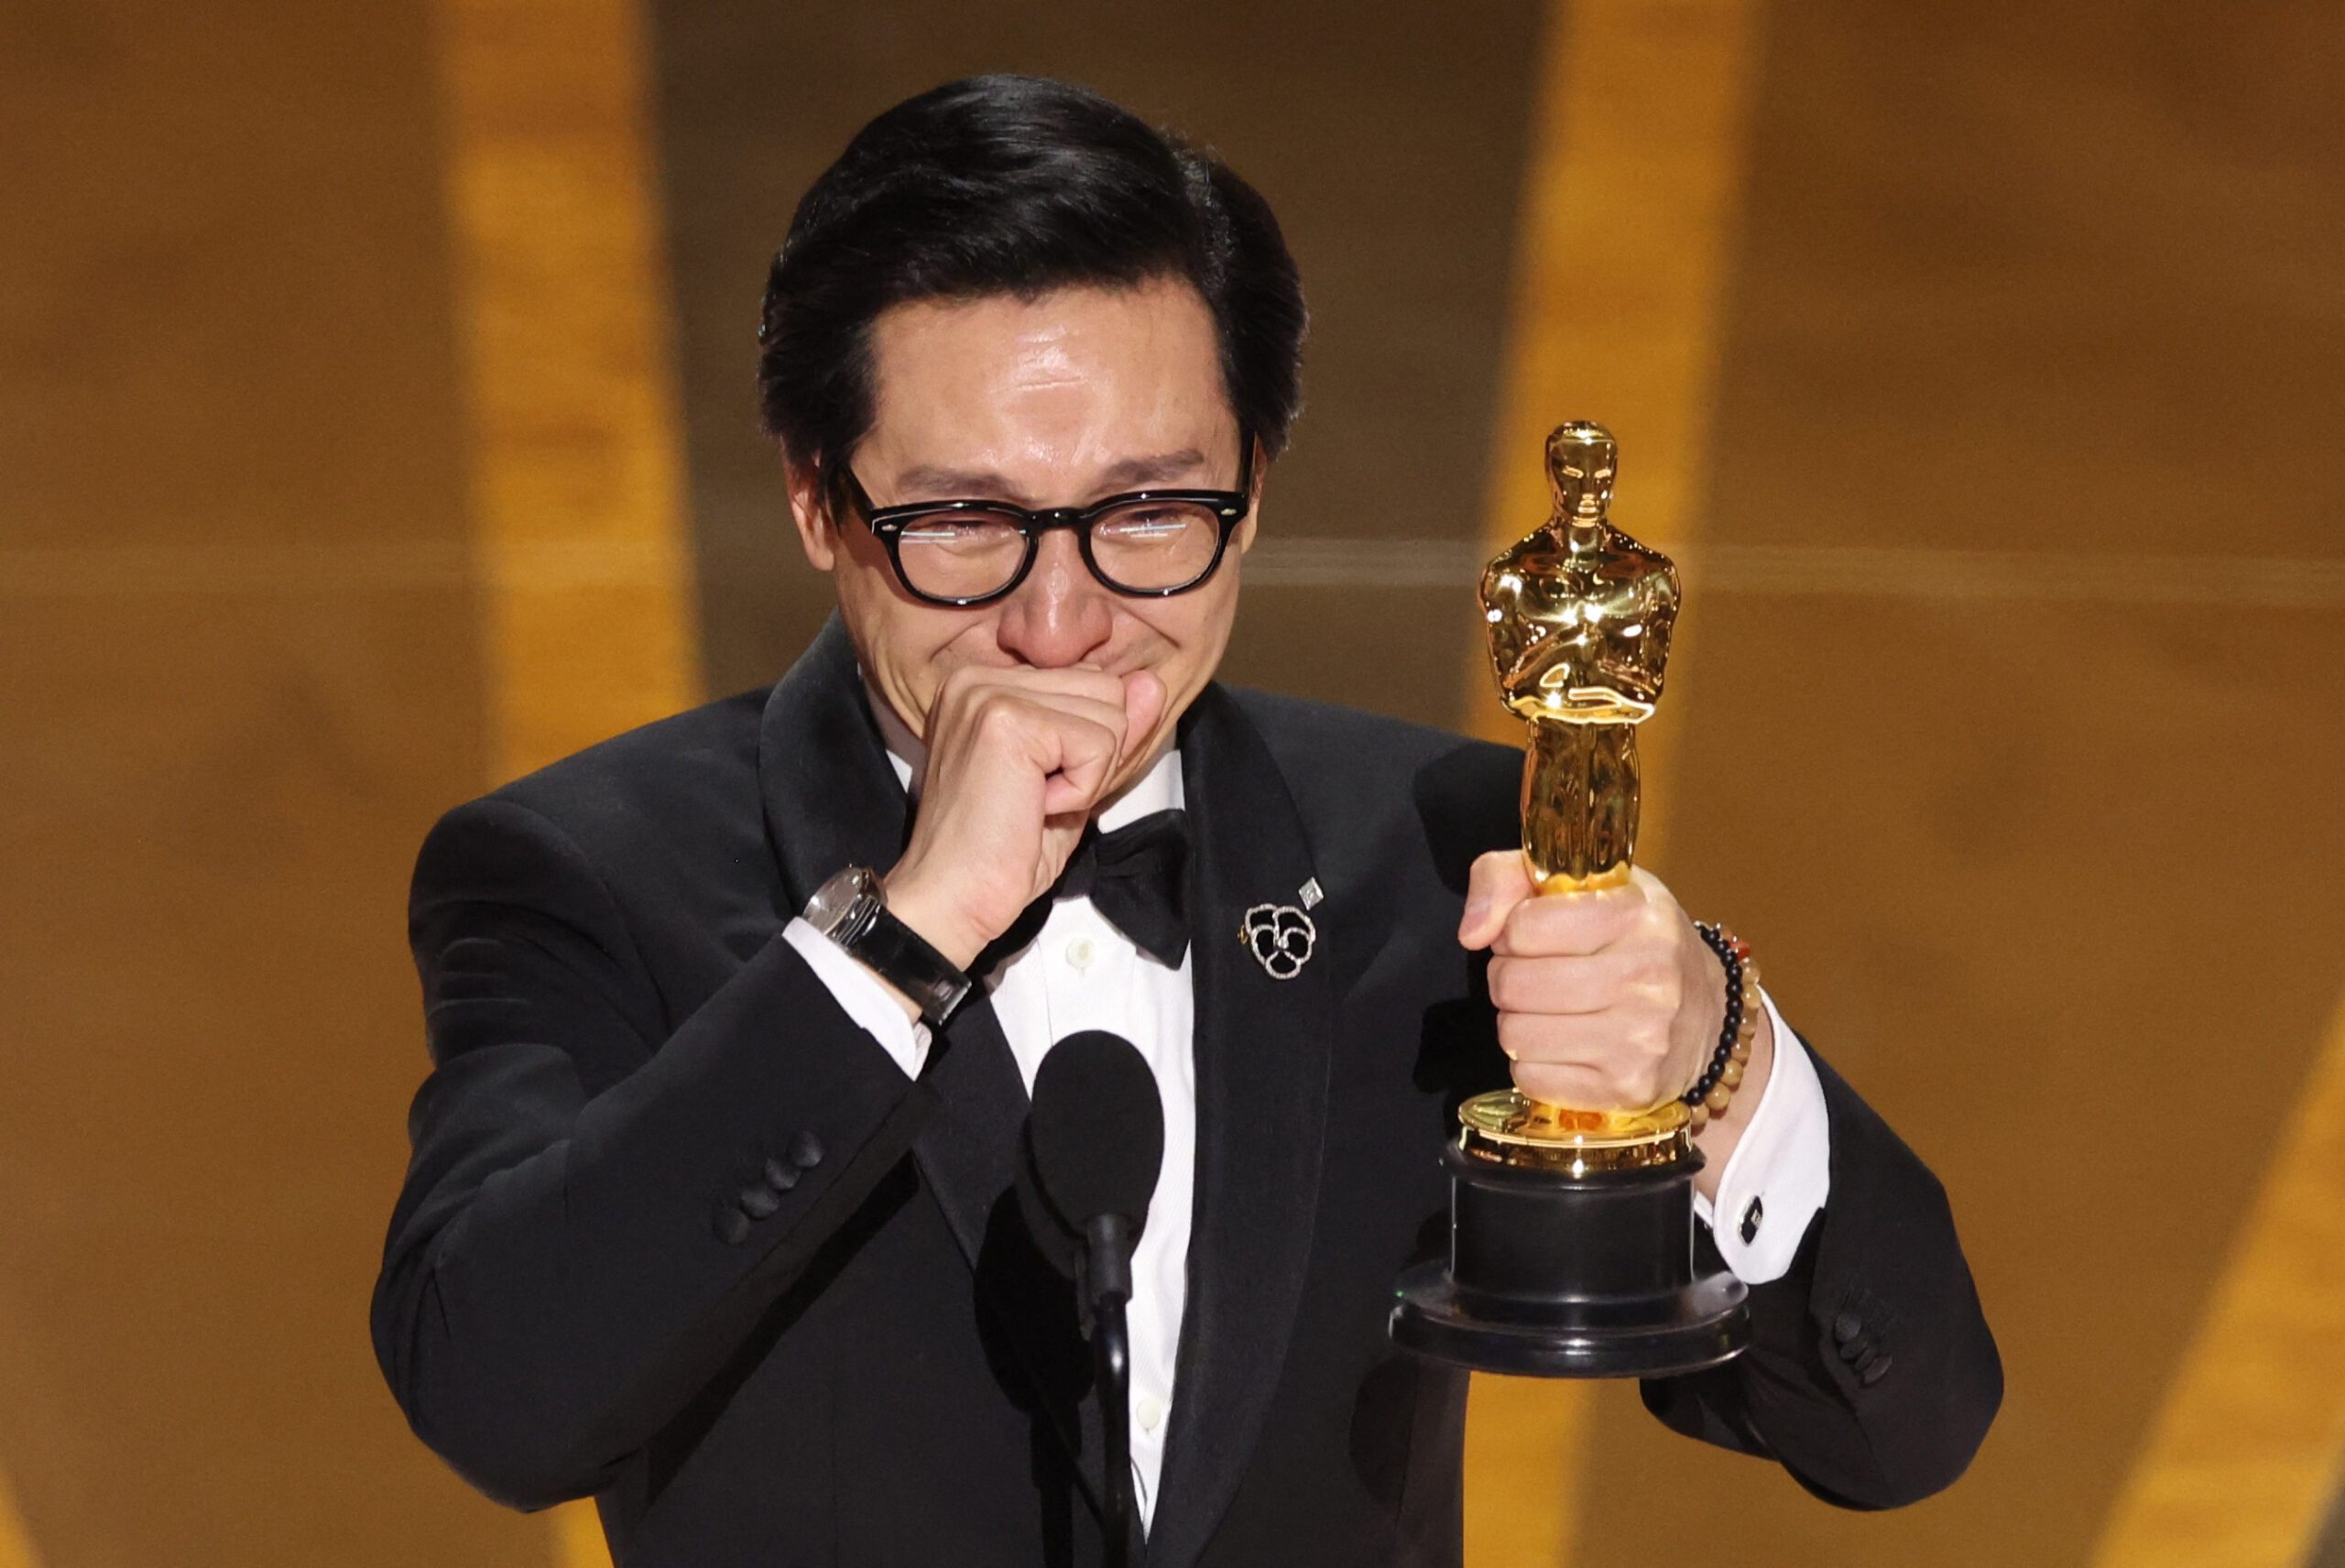 ‘Everything, Everywhere All At Once’ star Ke Huy Quan wins supporting actor at Oscars 2023